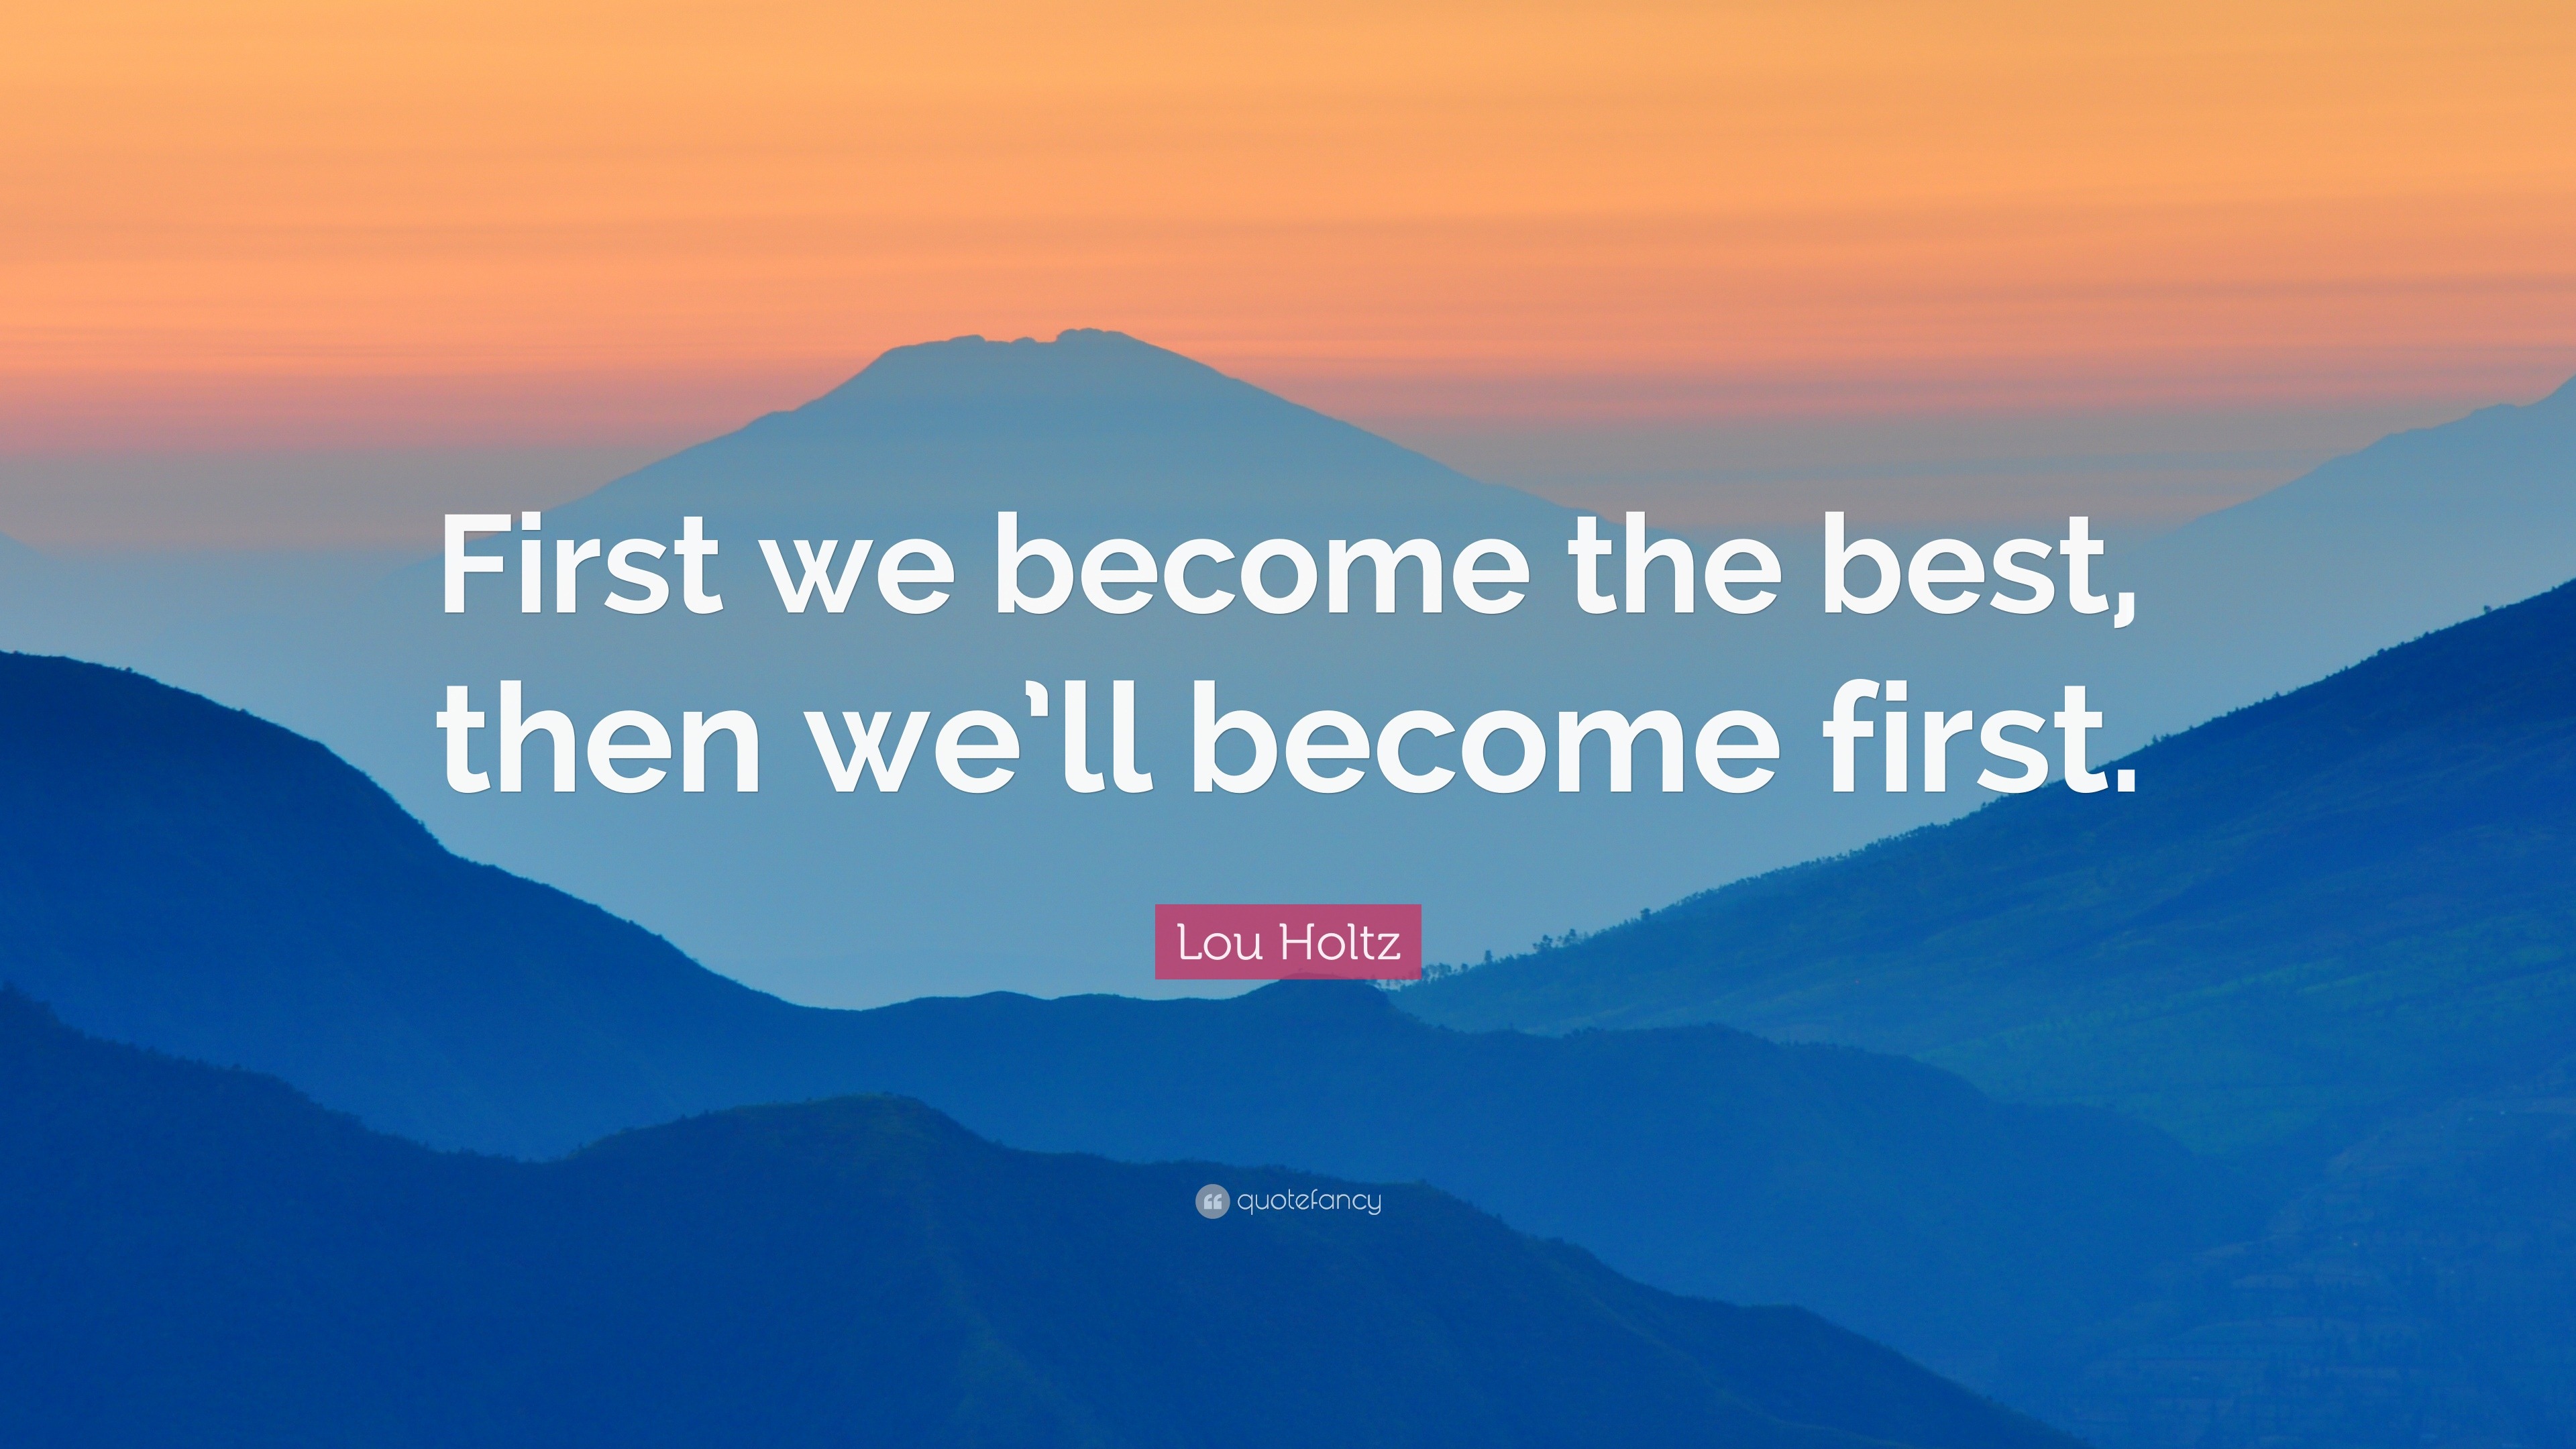 lou-holtz-quote-first-we-become-the-best-then-we-ll-become-first